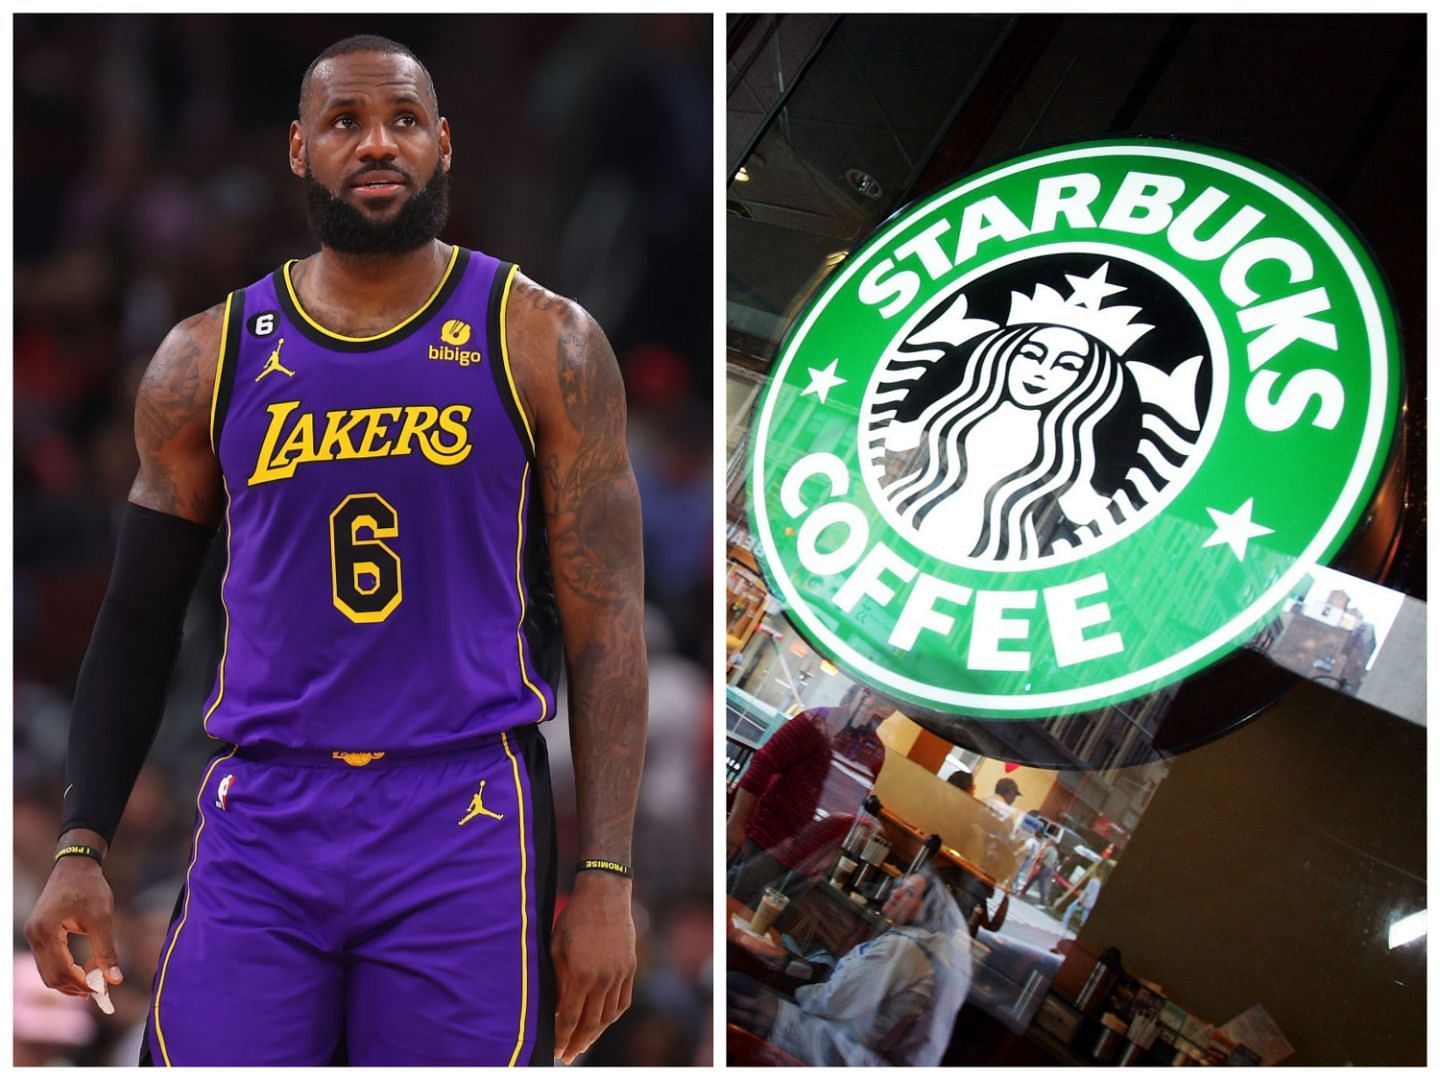 LeBron James opened a Starbucks in Akron, Ohio to help young people of the community.